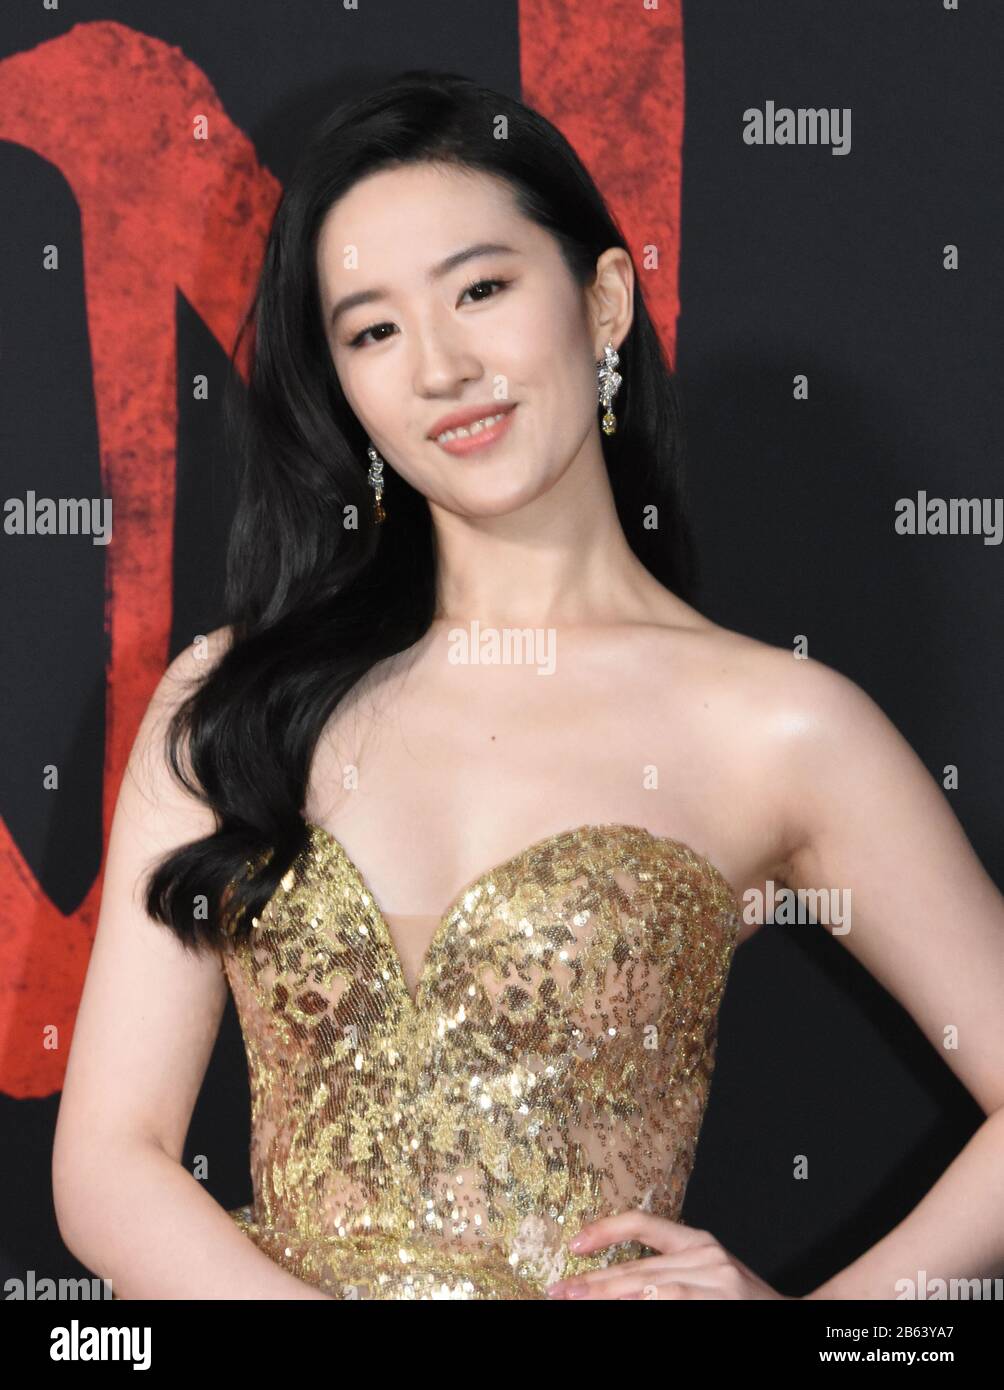 Hollywood, California, USA 9th March 2020 Actress Yifei Liu attends the World Premiere of Disney's  'Mulan' on March 9, 2020 at the Dolby Theatre in Hollywood, California, USA. Photo by Barry King/Alamy Live News Stock Photo